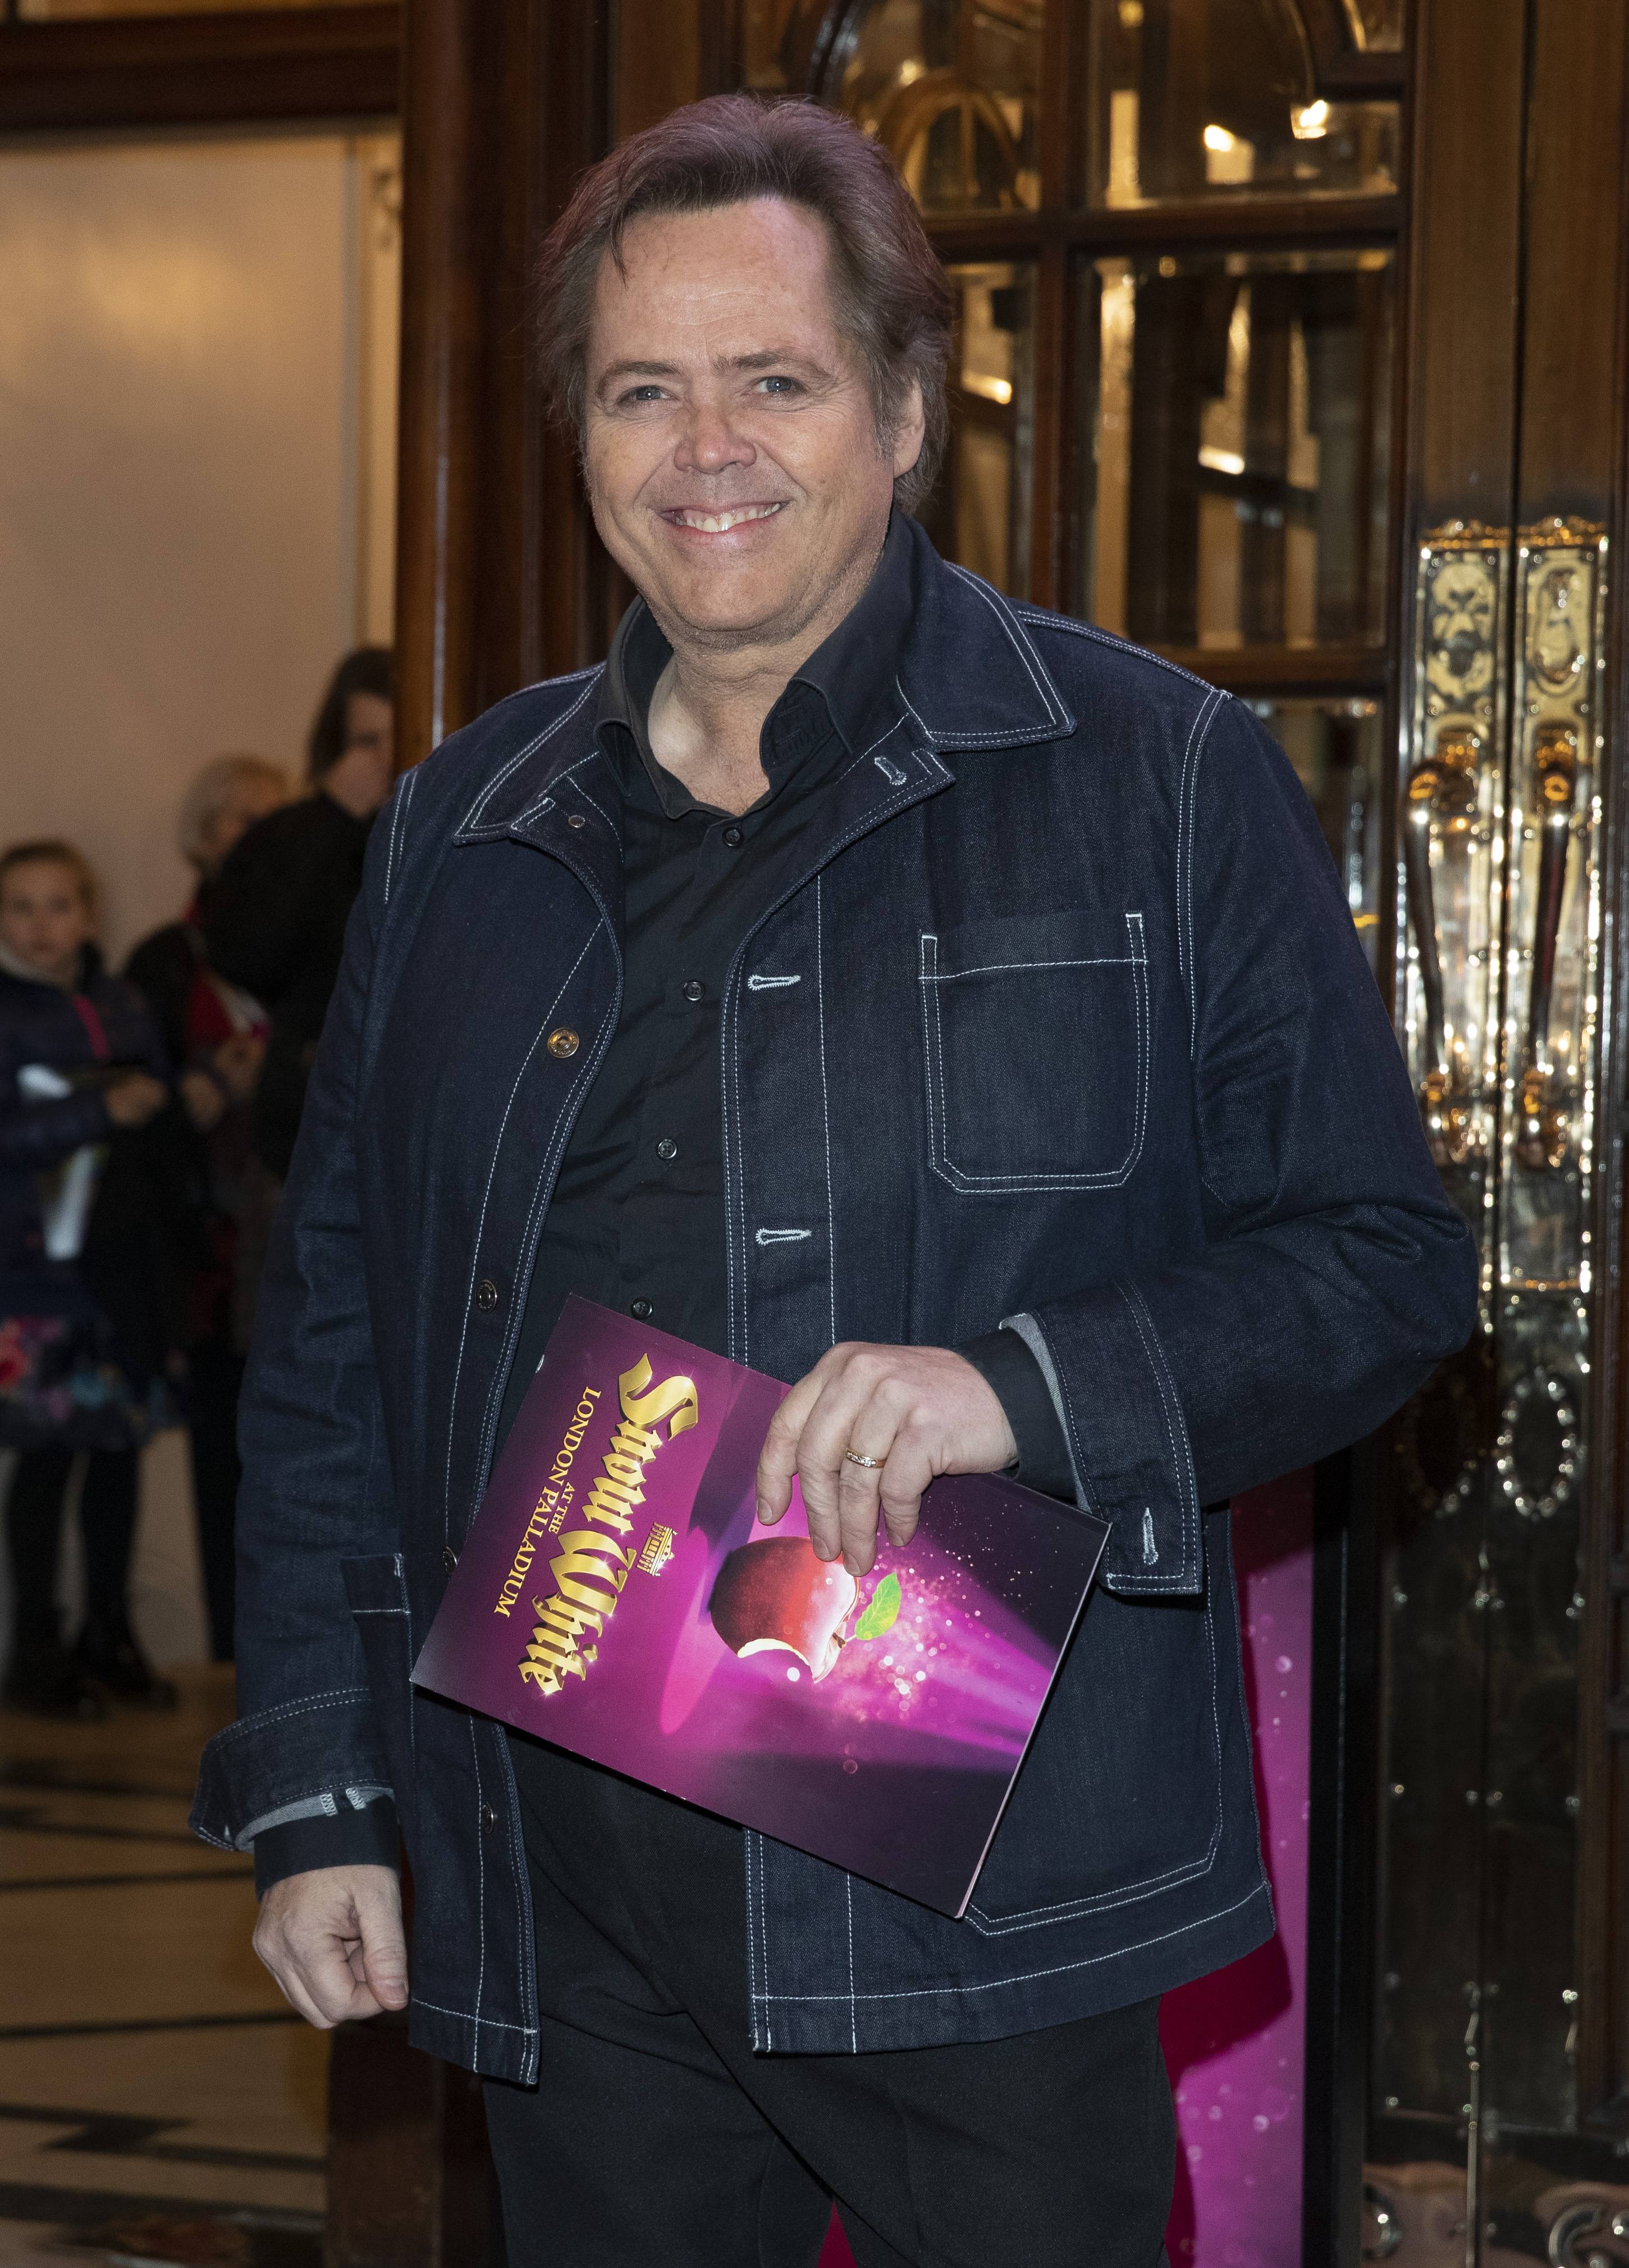 <p>Jimmy Osmond found success in various areas of entertainment over the years. Like siblings Donny Osmond and Marie Osmond, he thrived in musical theater and has starred in "Joseph and the Amazing Technicolor Dreamcoat" and the stage version of "Boogie Nights" over the years. More recently, he was featured on the small screen, popping up on British reality shows like "I'm a Celebrity... Get Me Out of Here!," "All Star Family Fortunes," "Popstar to Operastar" and "Celebrity Masterchef." The youngest member of The Osmonds suffered a stroke while performing in a "Peter Pan" pantomime in Birmingham, England, in December 2018. The following year, brother Merrill told the BBC a return to the stage for Jimmy was, at that time, "off the cards," but in 2020, Merrill told The Mirror that Jimmy was "getting better everyday" and was painting and jogging again. Jimmy has been married to Michelle Larson, with whom he shares four kids, since 1991. </p><p>MORE: <a href="https://www.wonderwall.com/entertainment/music/70s-rock-bands-where-are-they-now-3007635.gallery">'70s rock bands: Where are they now?</a></p>